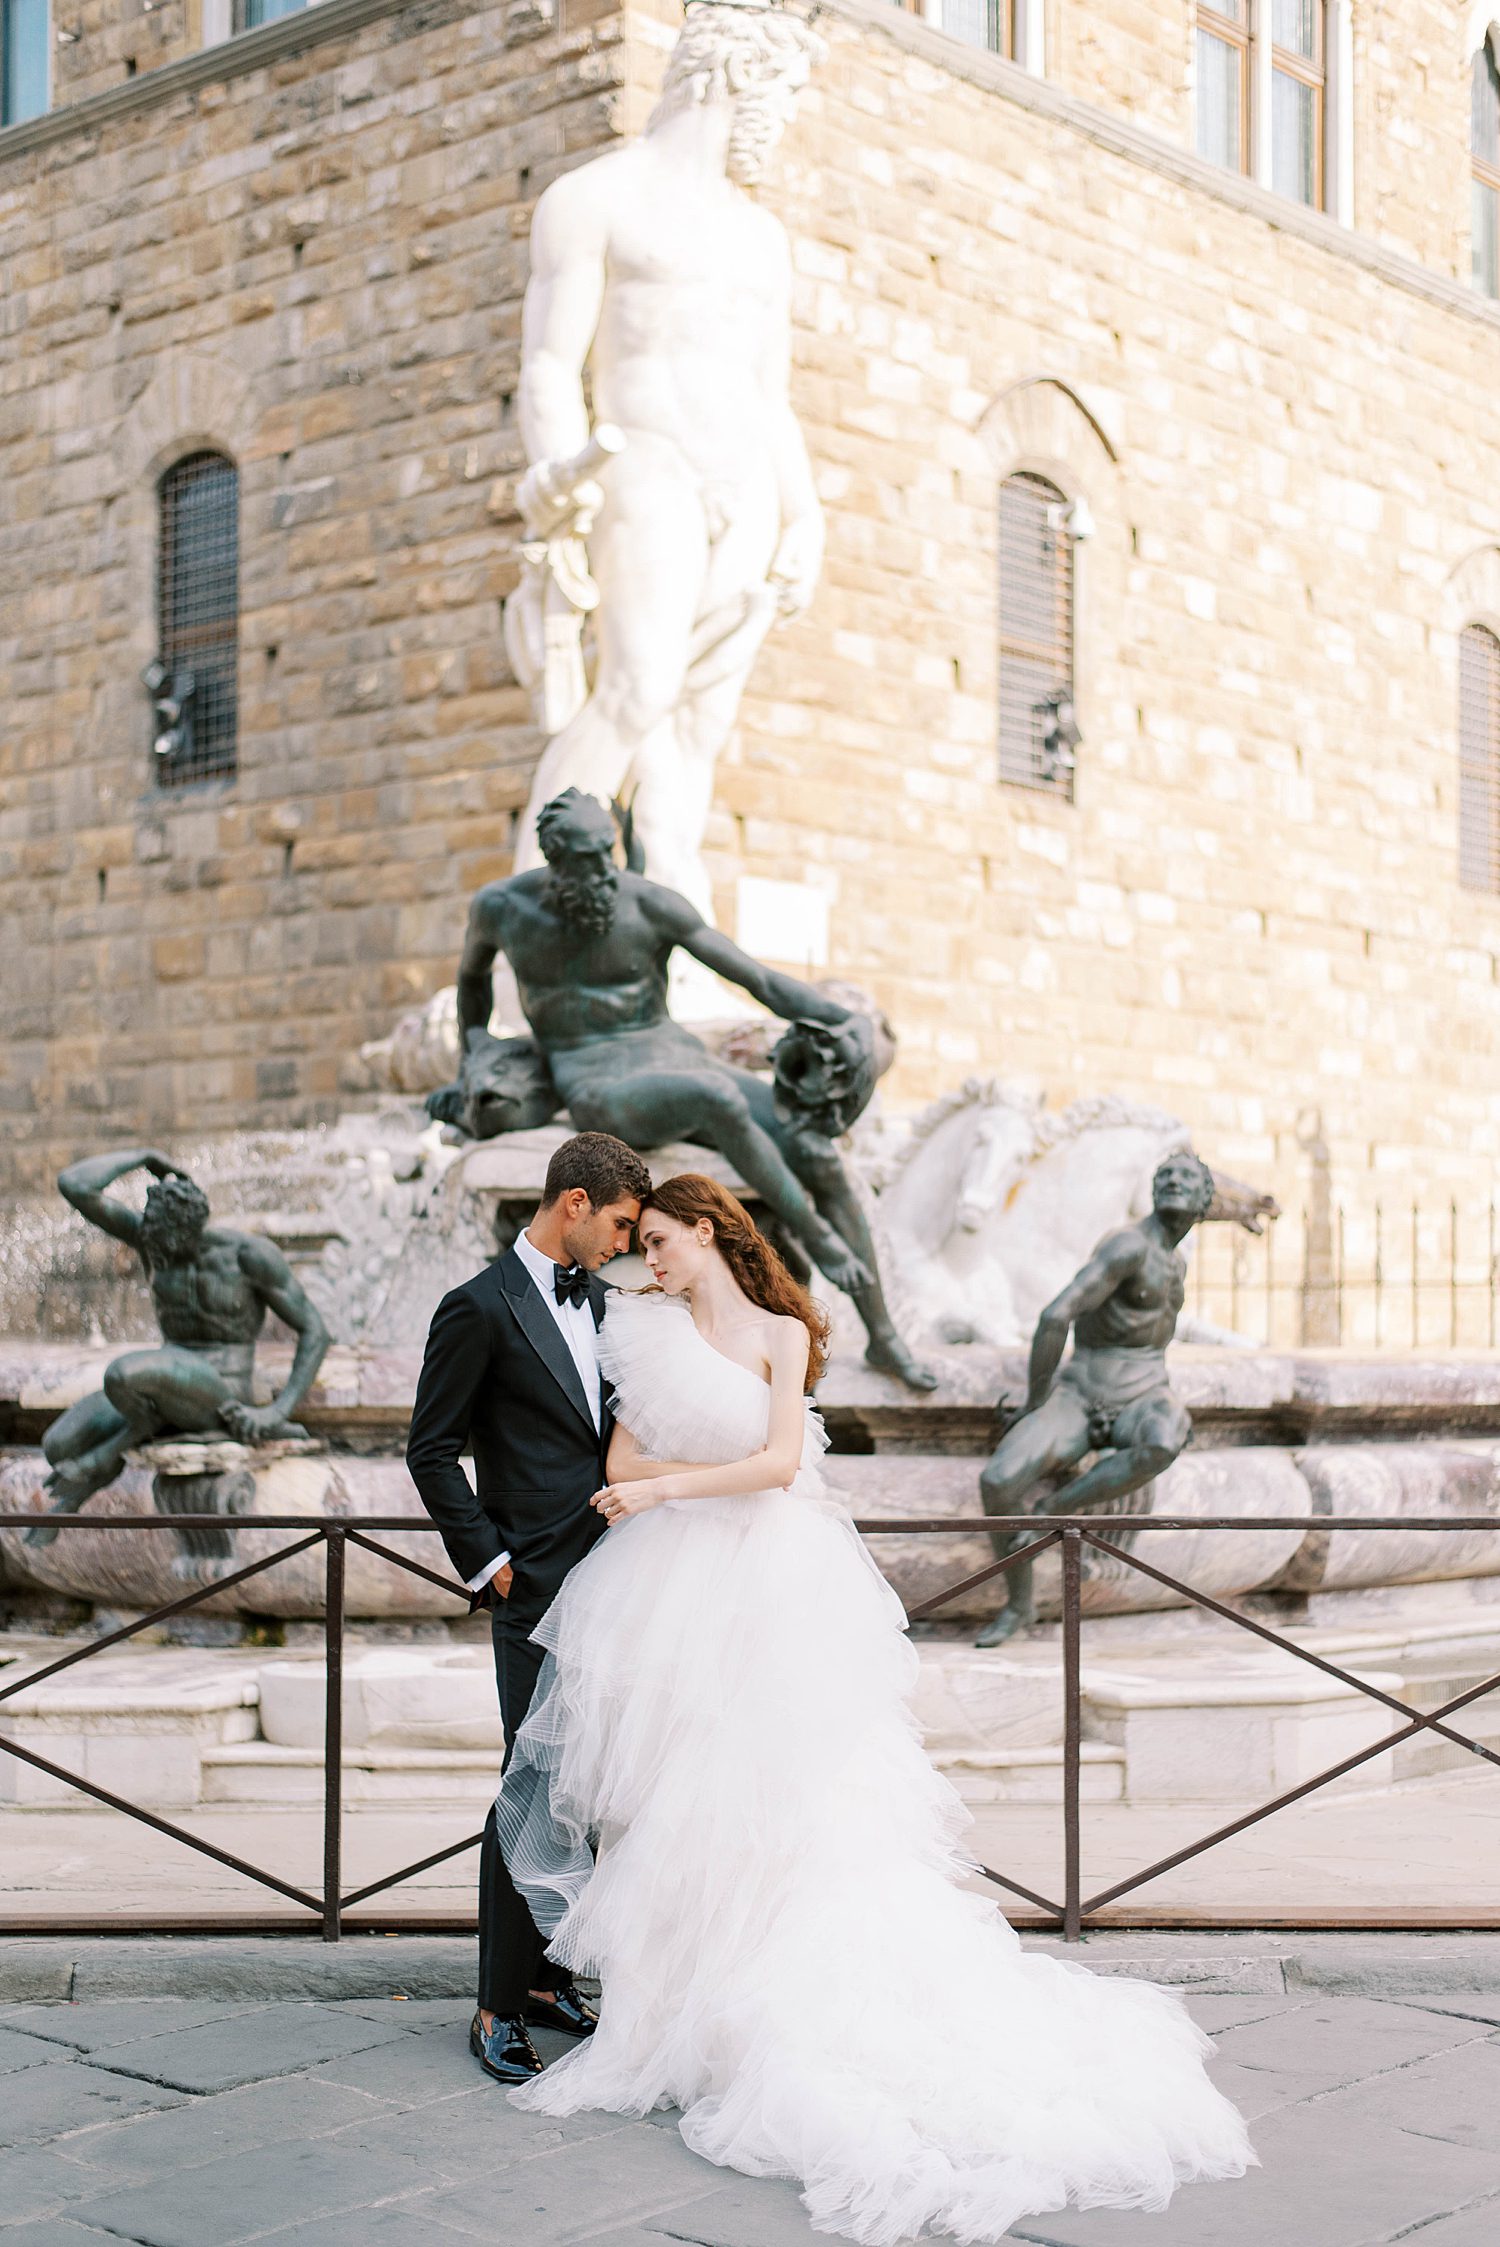 Florence Italy wedding photographer shares how to make the most out of your destination wedding in Italy